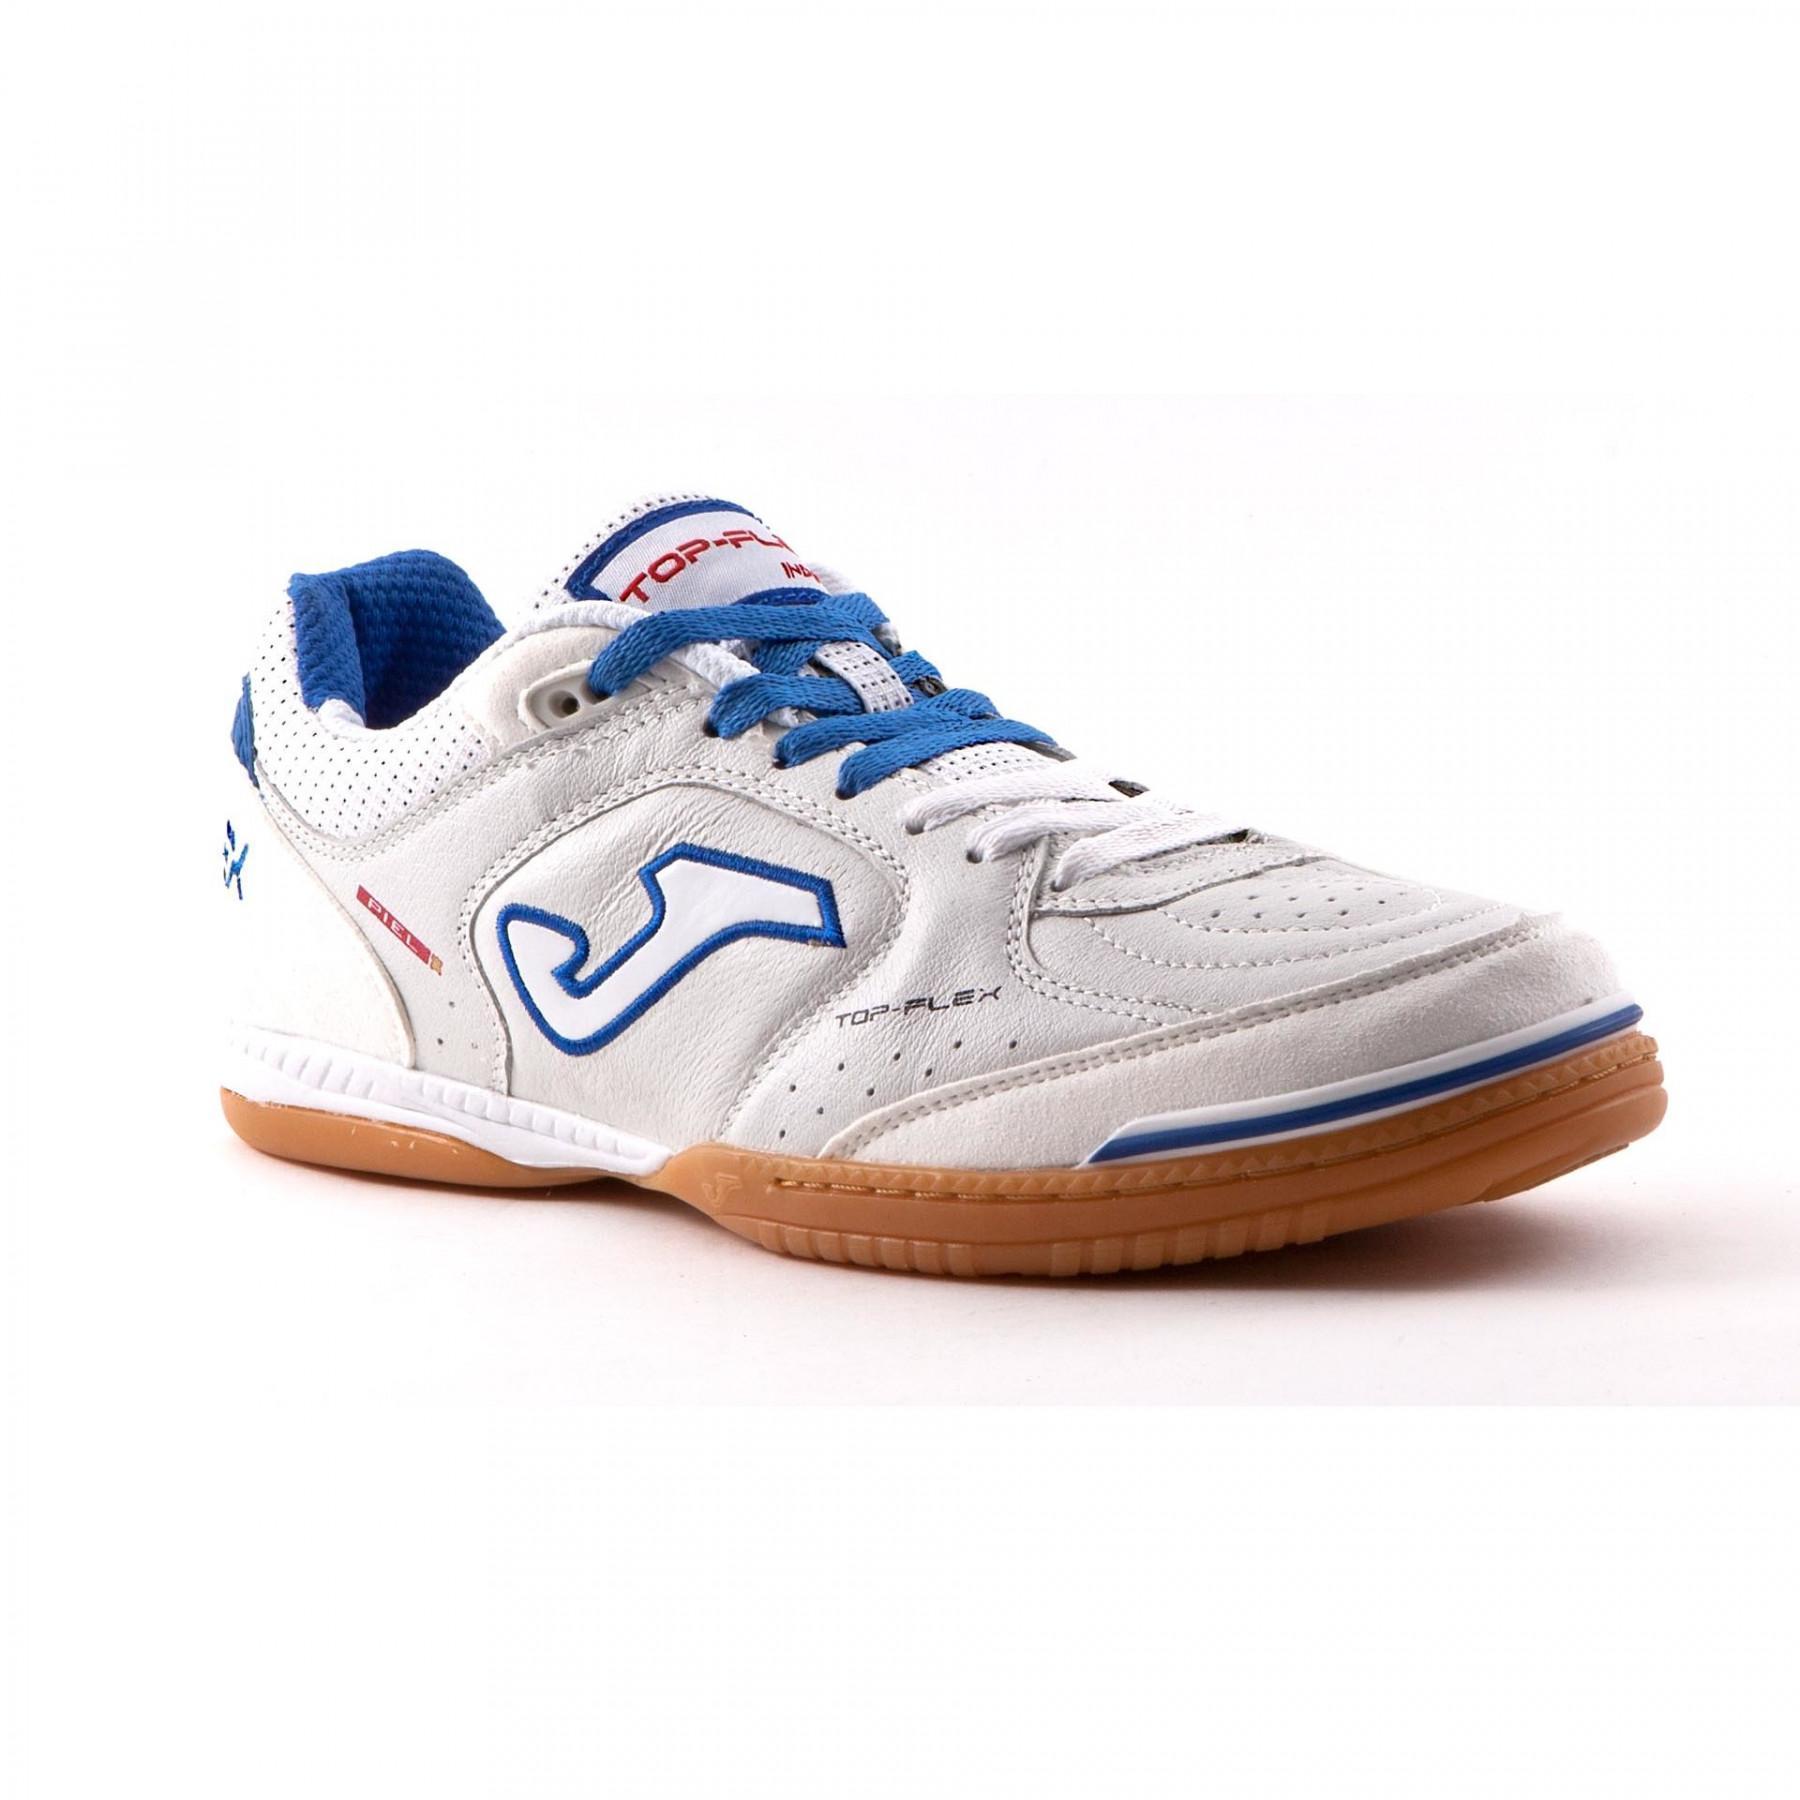 Shoes Joma Top flex 602 IN